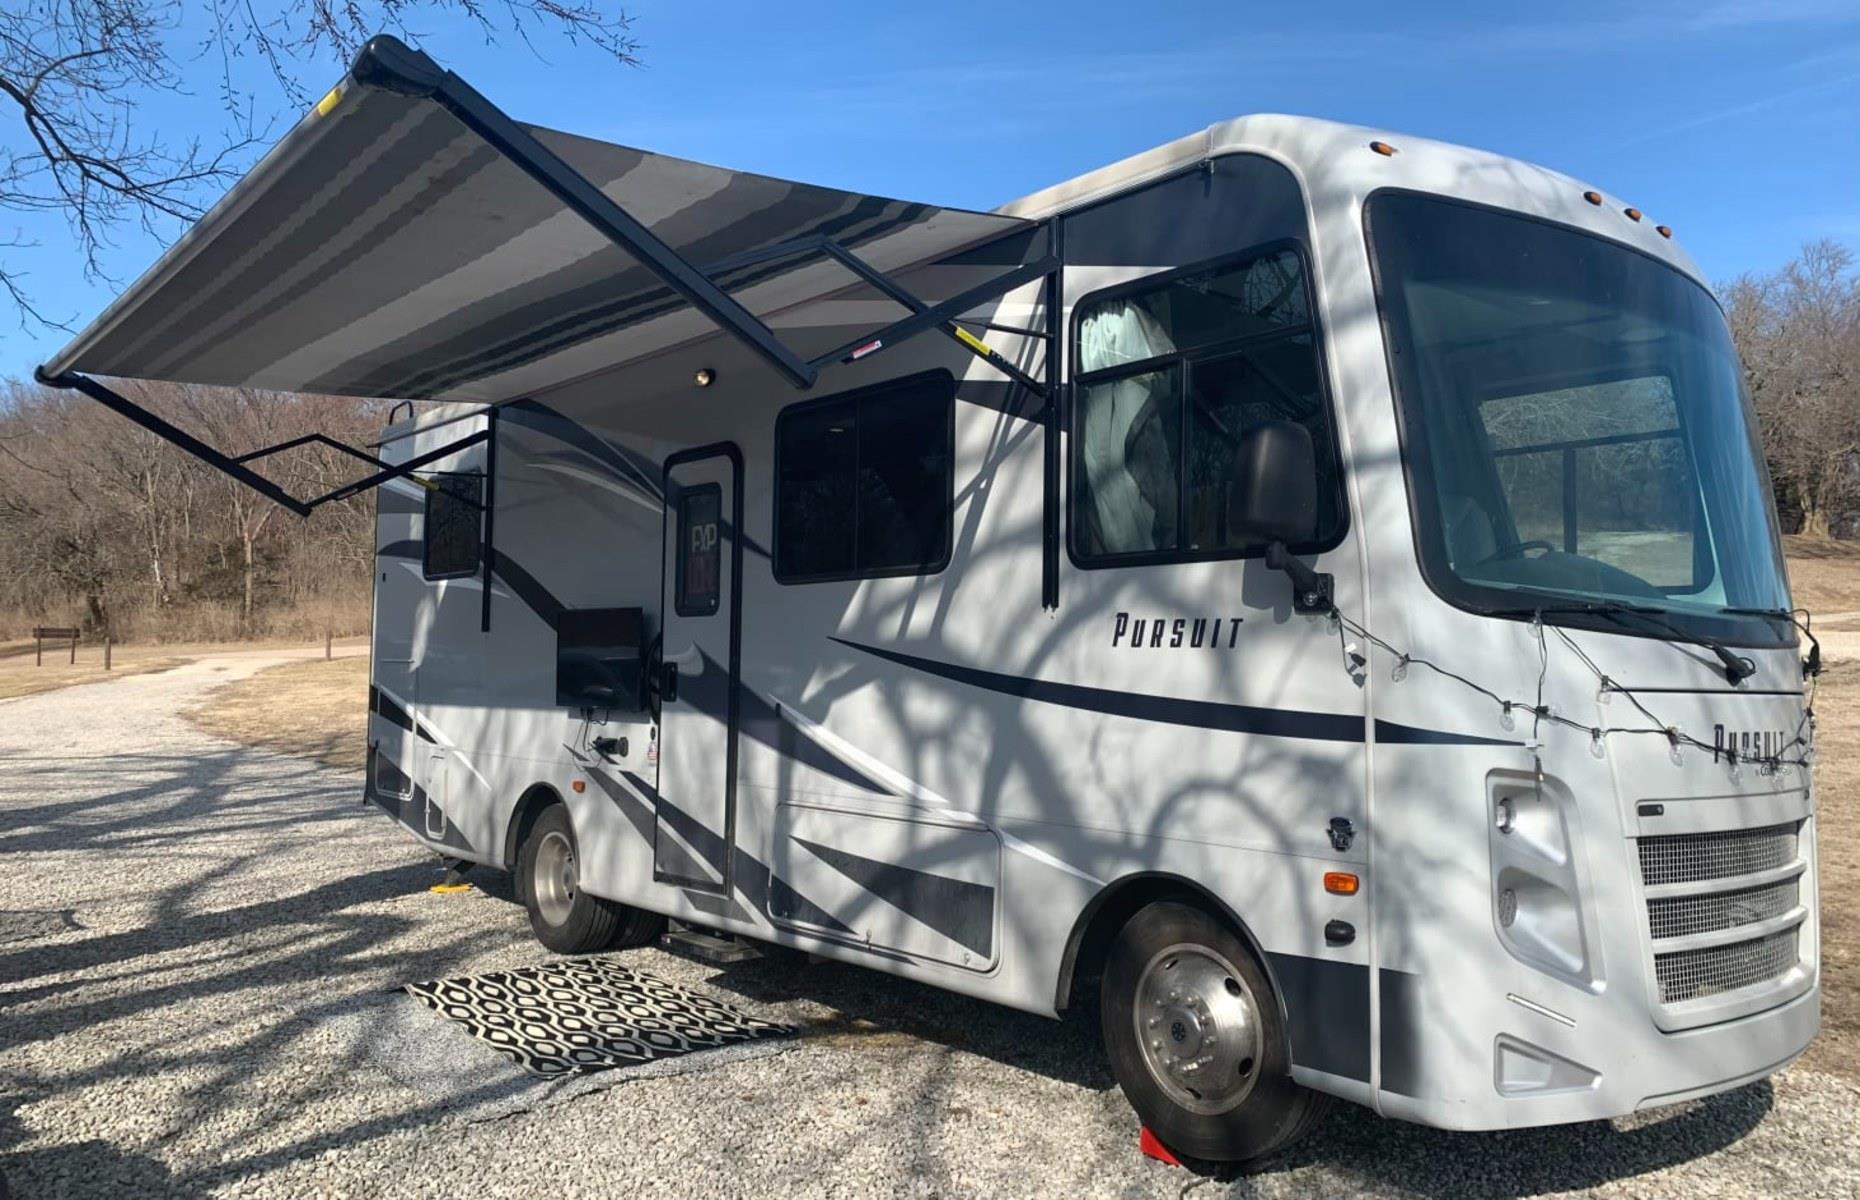 <p>For a dependable motorhome perfect for a small family vacation, look no further than the new 2021 Coachmen Pursuit 27XPS. Measuring roughly 29 feet (9m) long, the impressive RV combines luxury amenities with a smooth sailing ride and has plenty of space for up to six guests. </p>  <p><strong><a href="https://www.loveexploring.com/galleries/90581/americas-best-longweekend-escapes?page=1">Check out America’s best long-weekend escapes</a></strong></p>